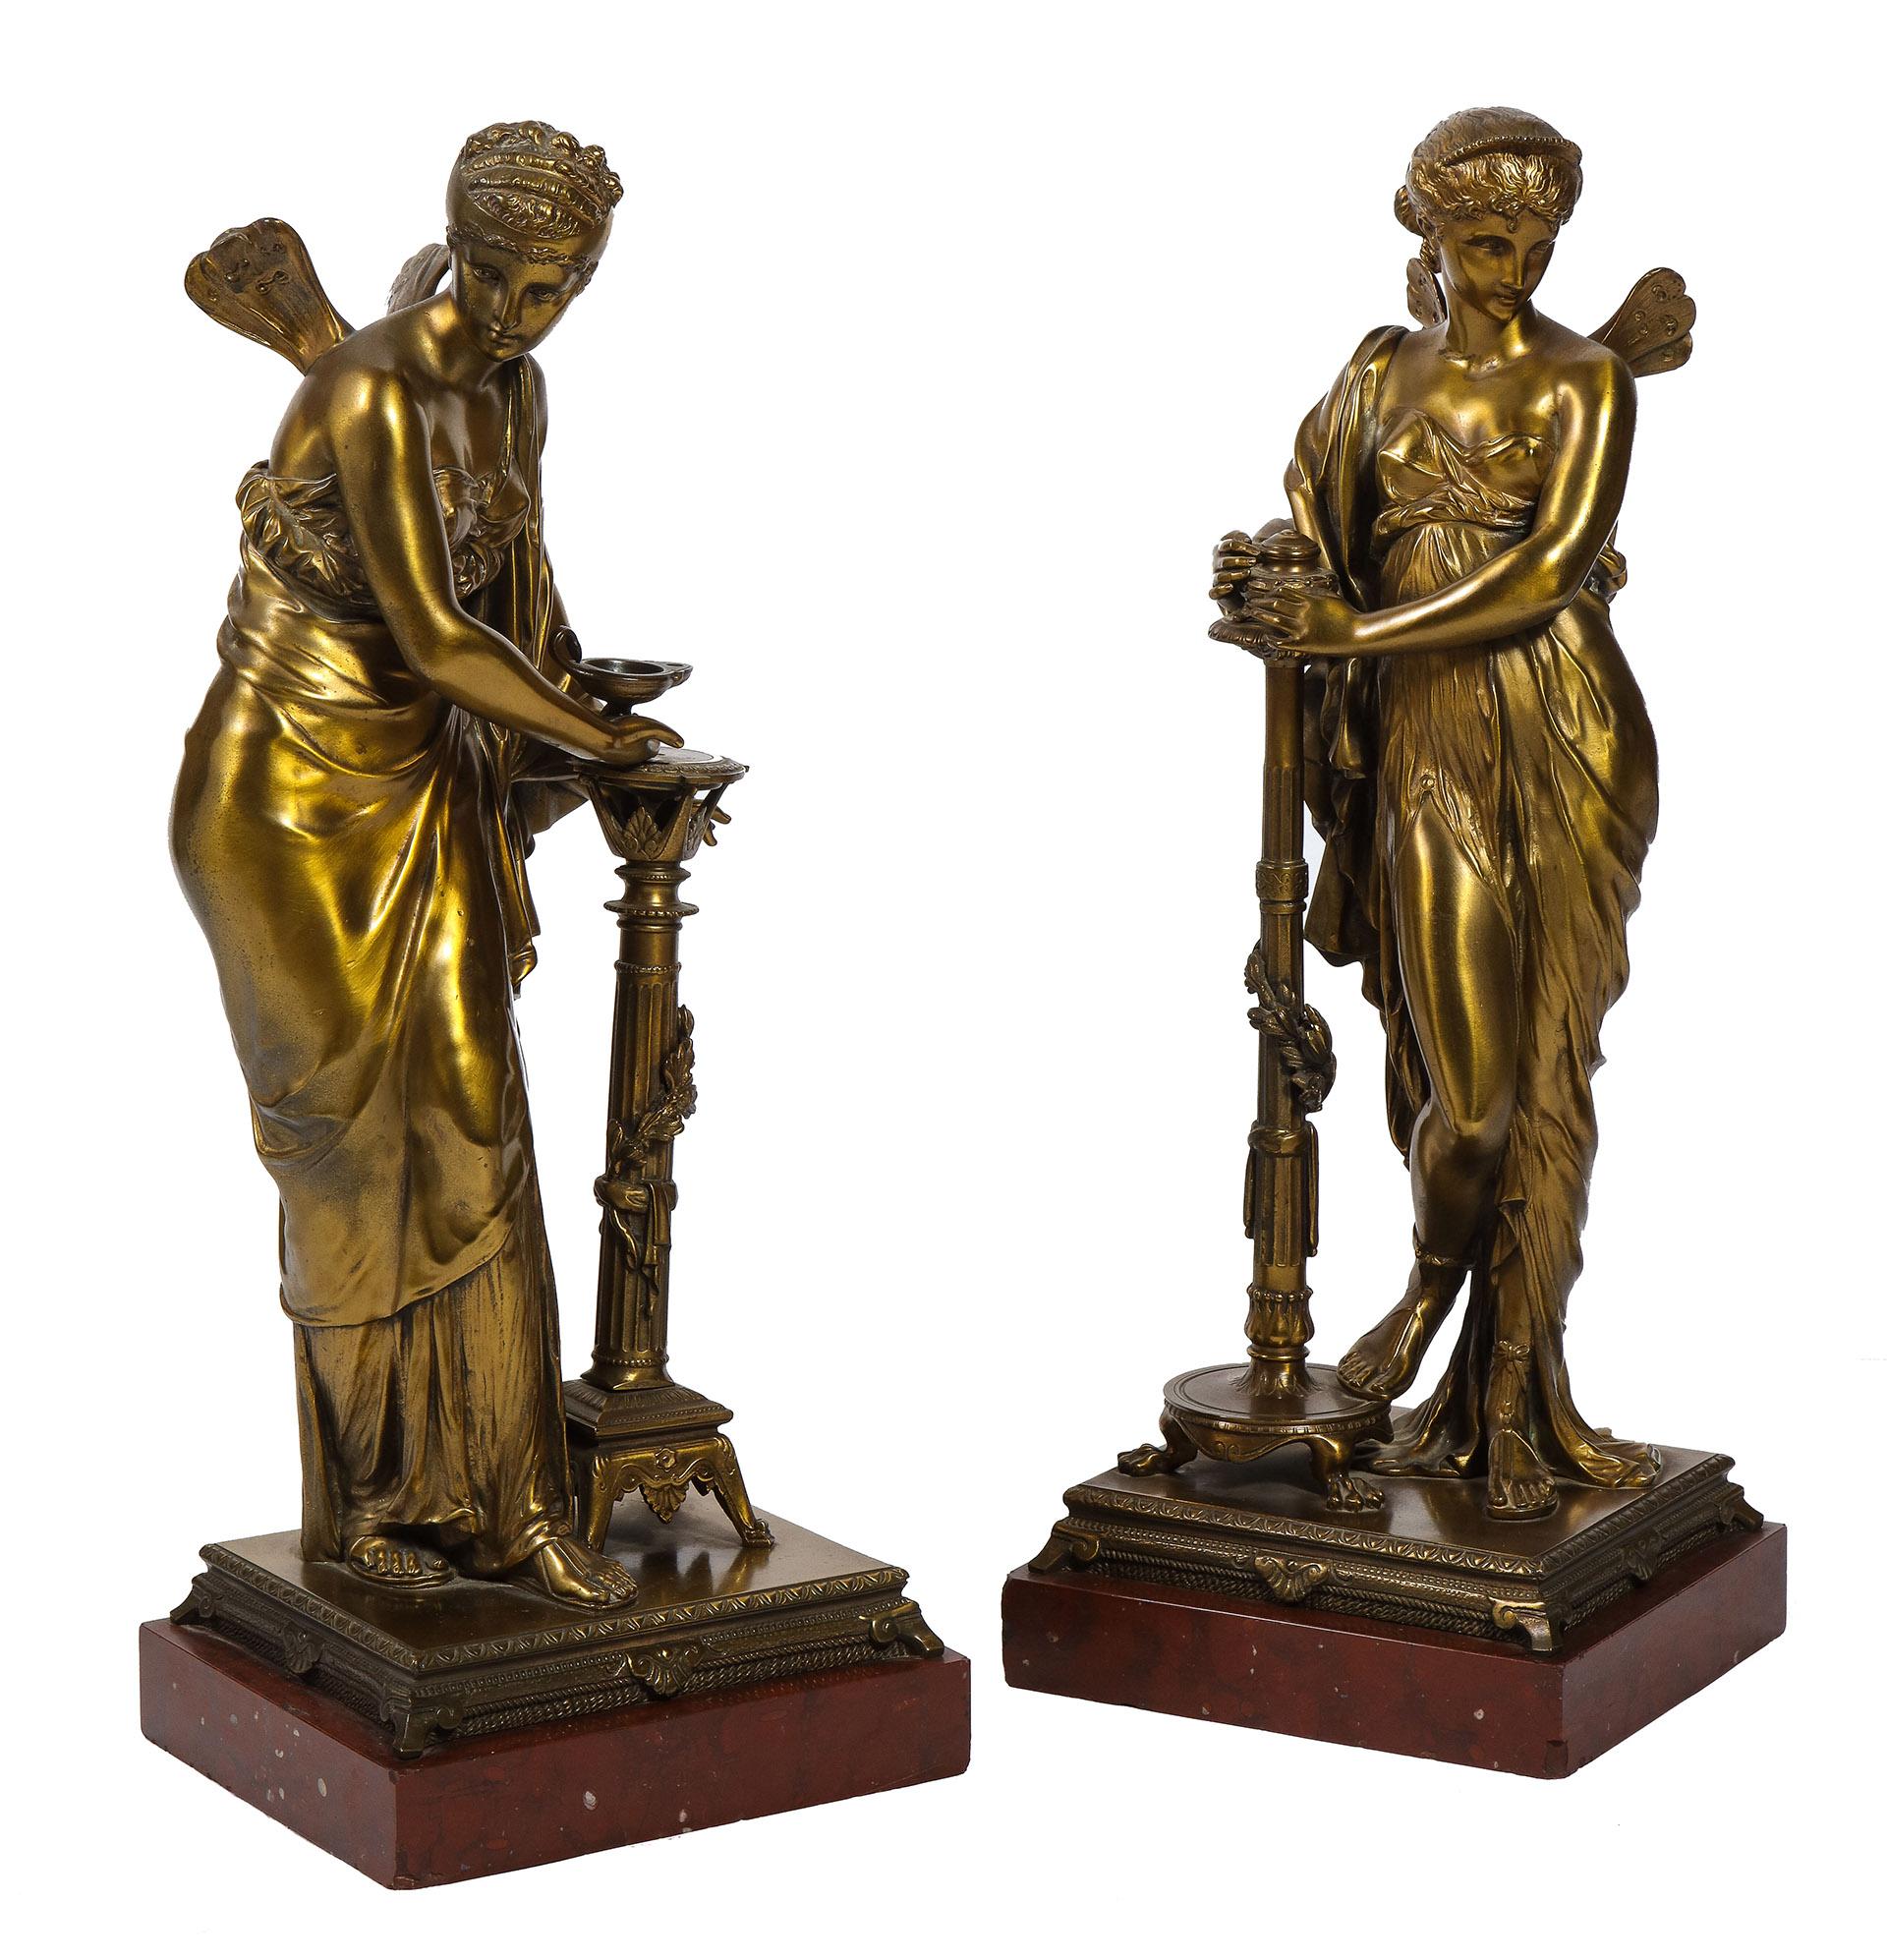 Each figure beautifully cast and chased bronze on a Rosso Antico base.